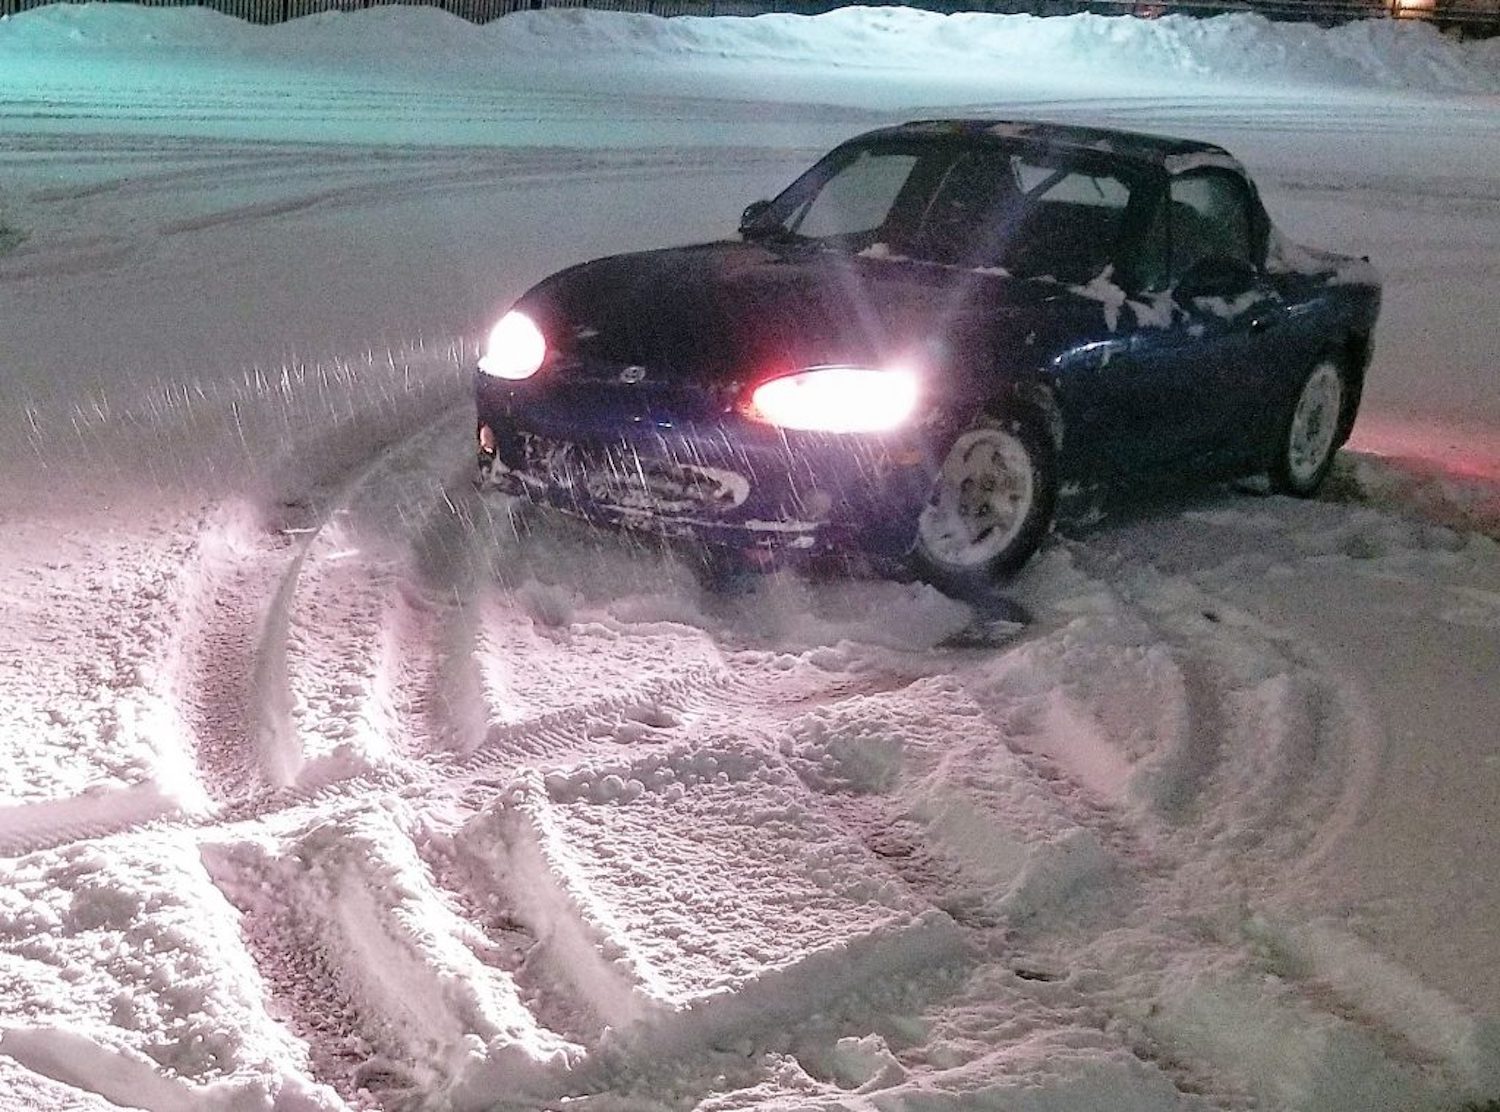 A Mazda Miata roadster parked in a circle of tire tracks left in a snow-covered parking lot.